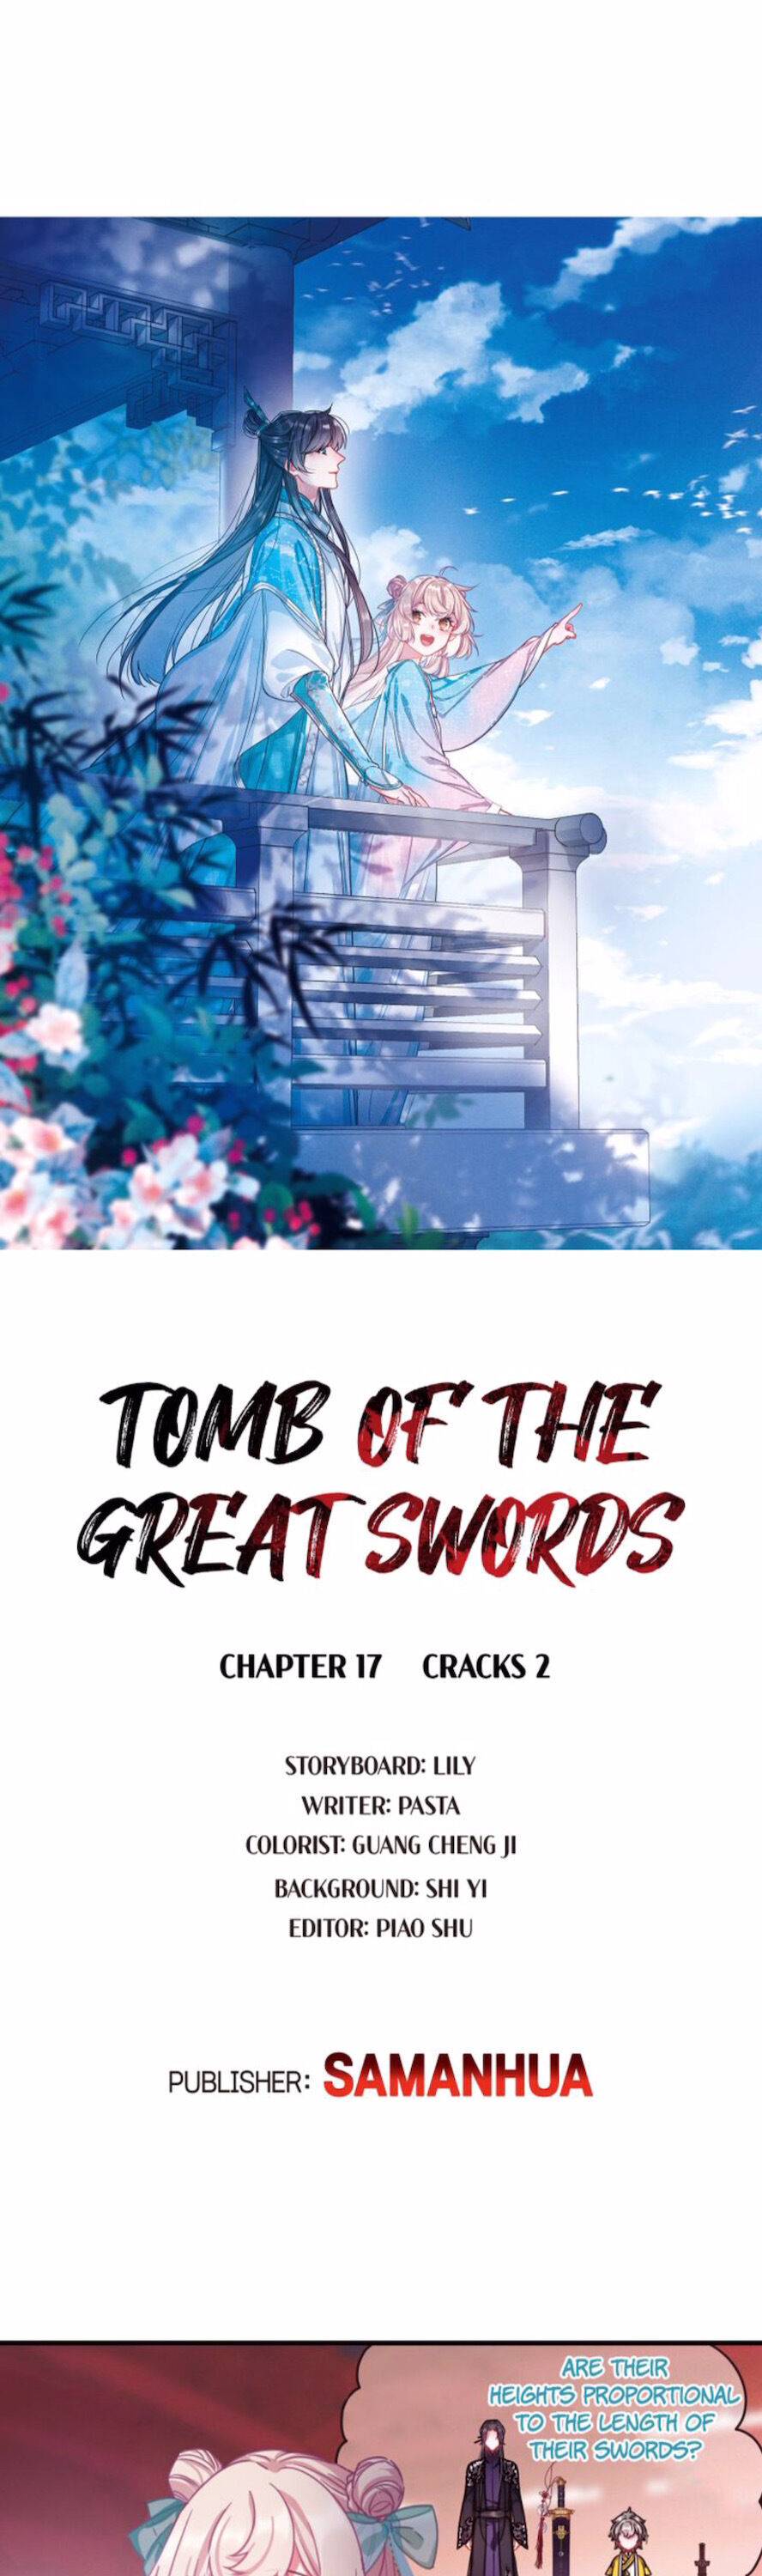 Tomb of the Great Swords Chapter 17